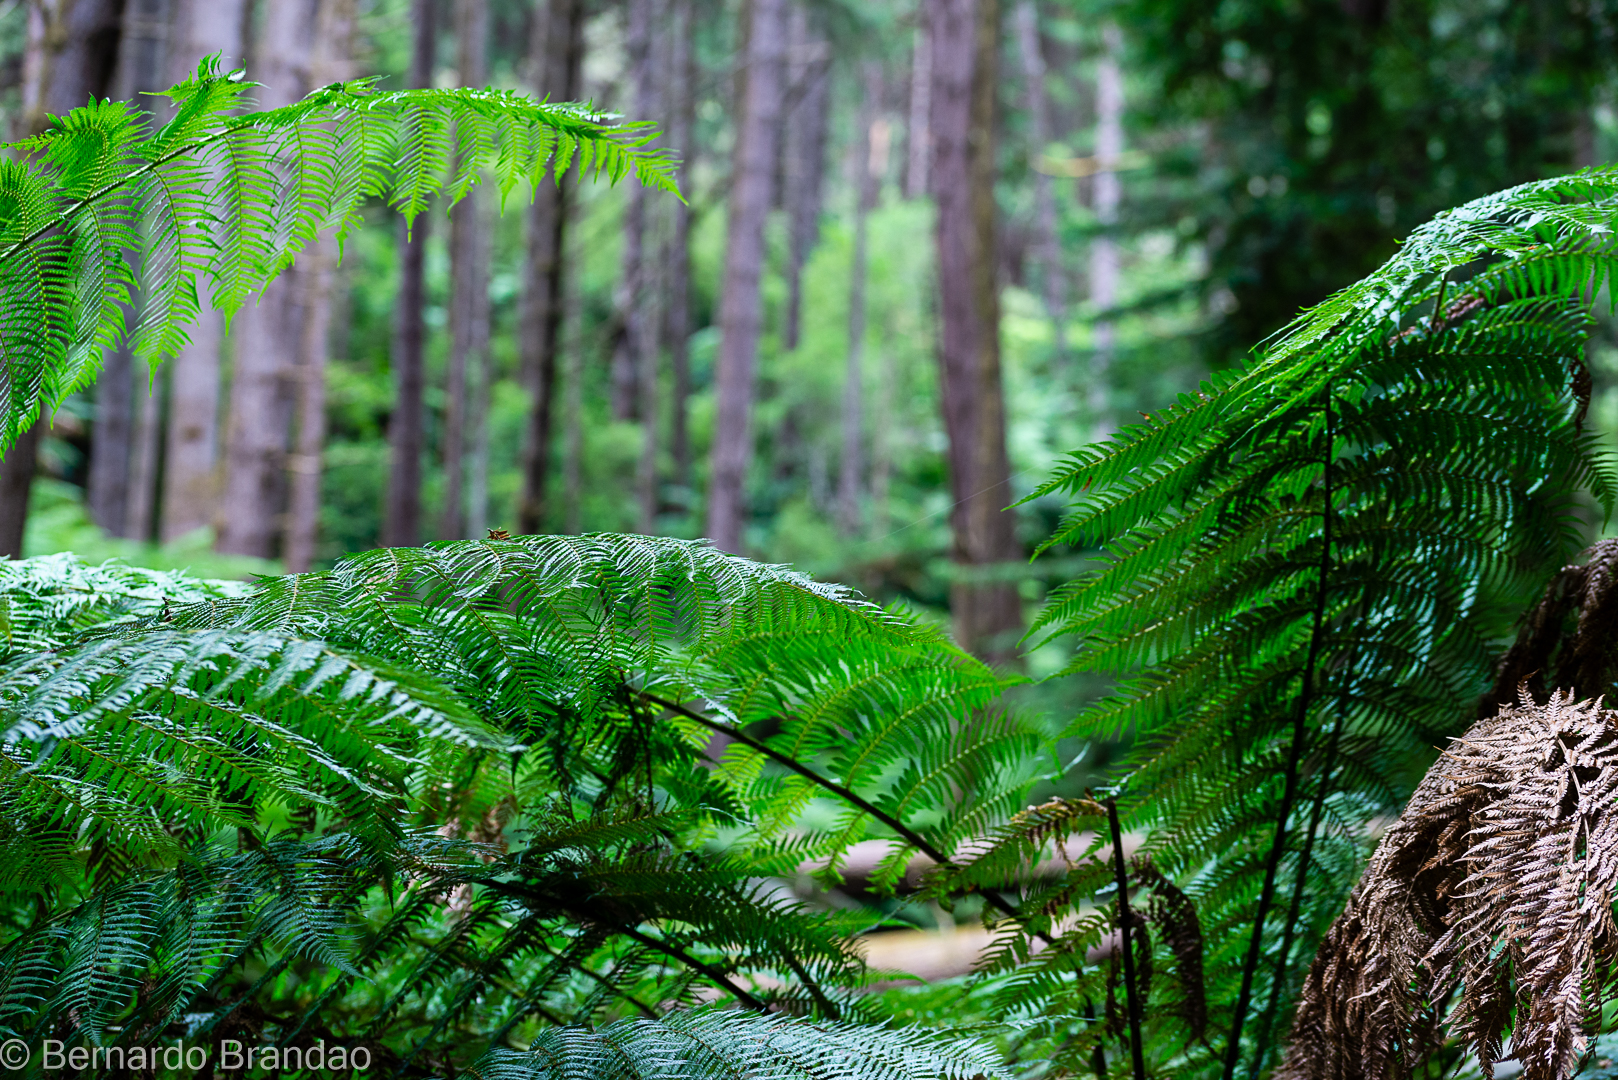 Redwood Forest Trip: The Photos